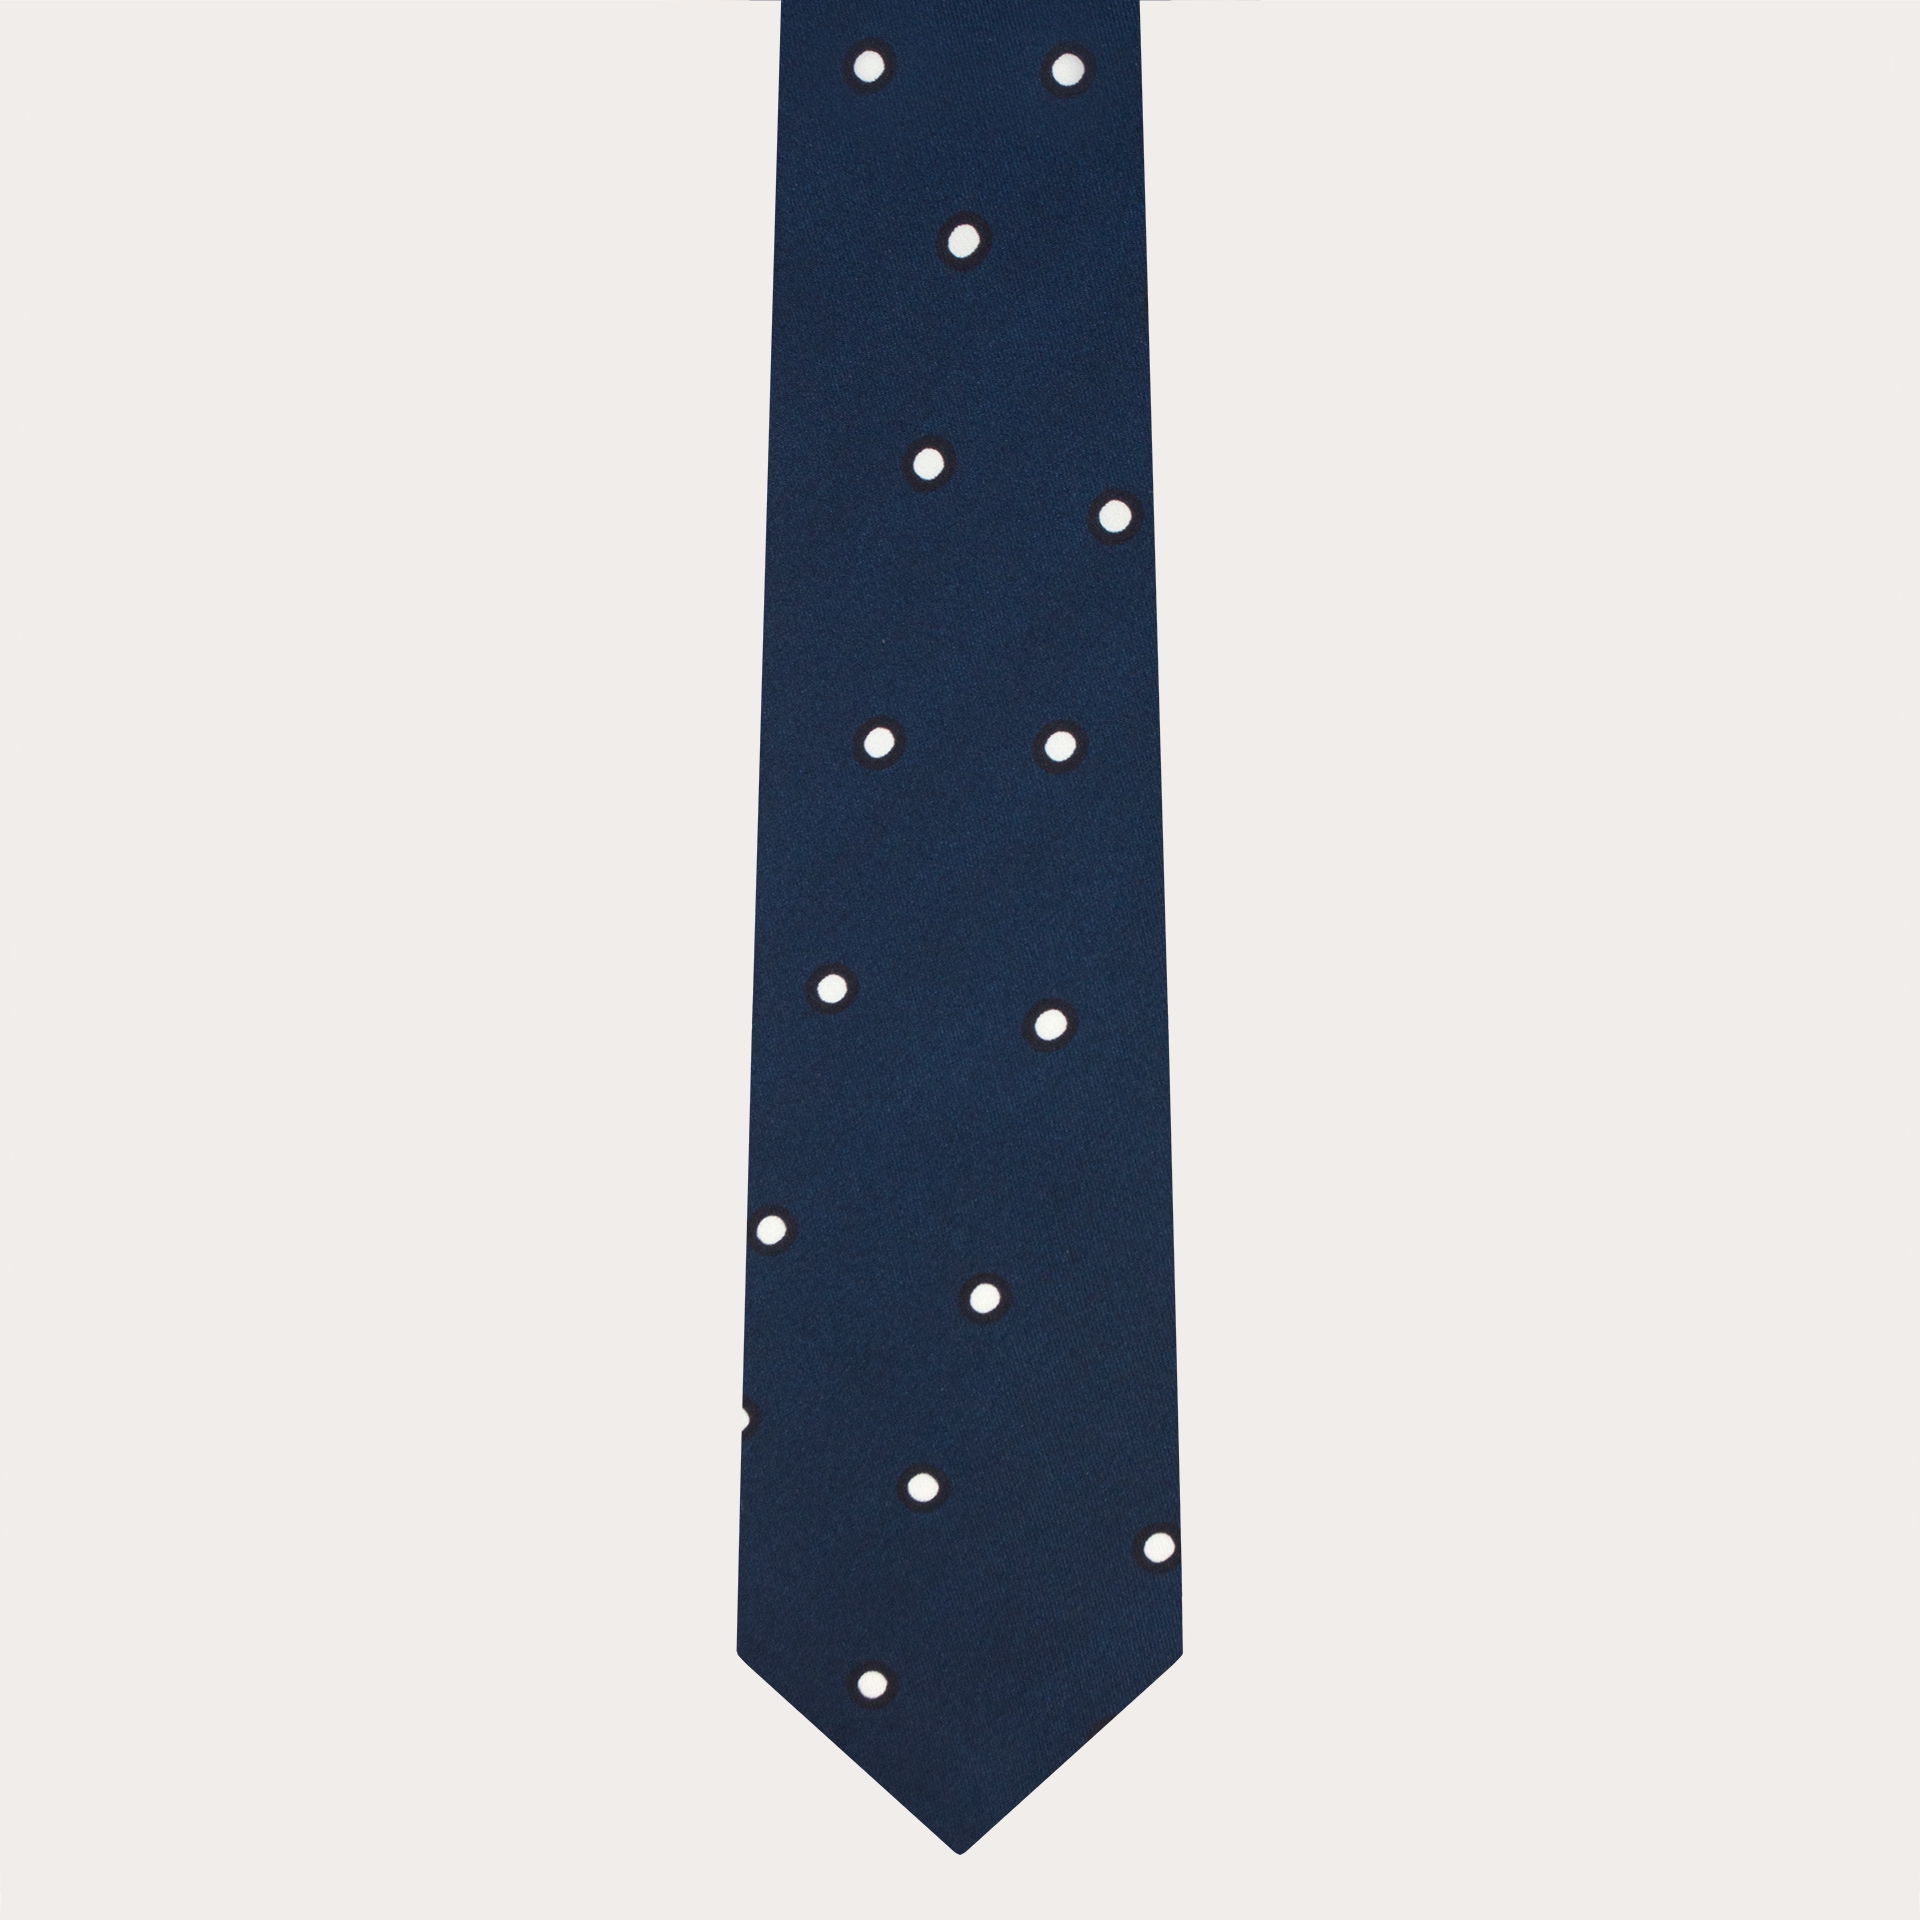 BRUCLE Blue silk tie with white polka dots pattern